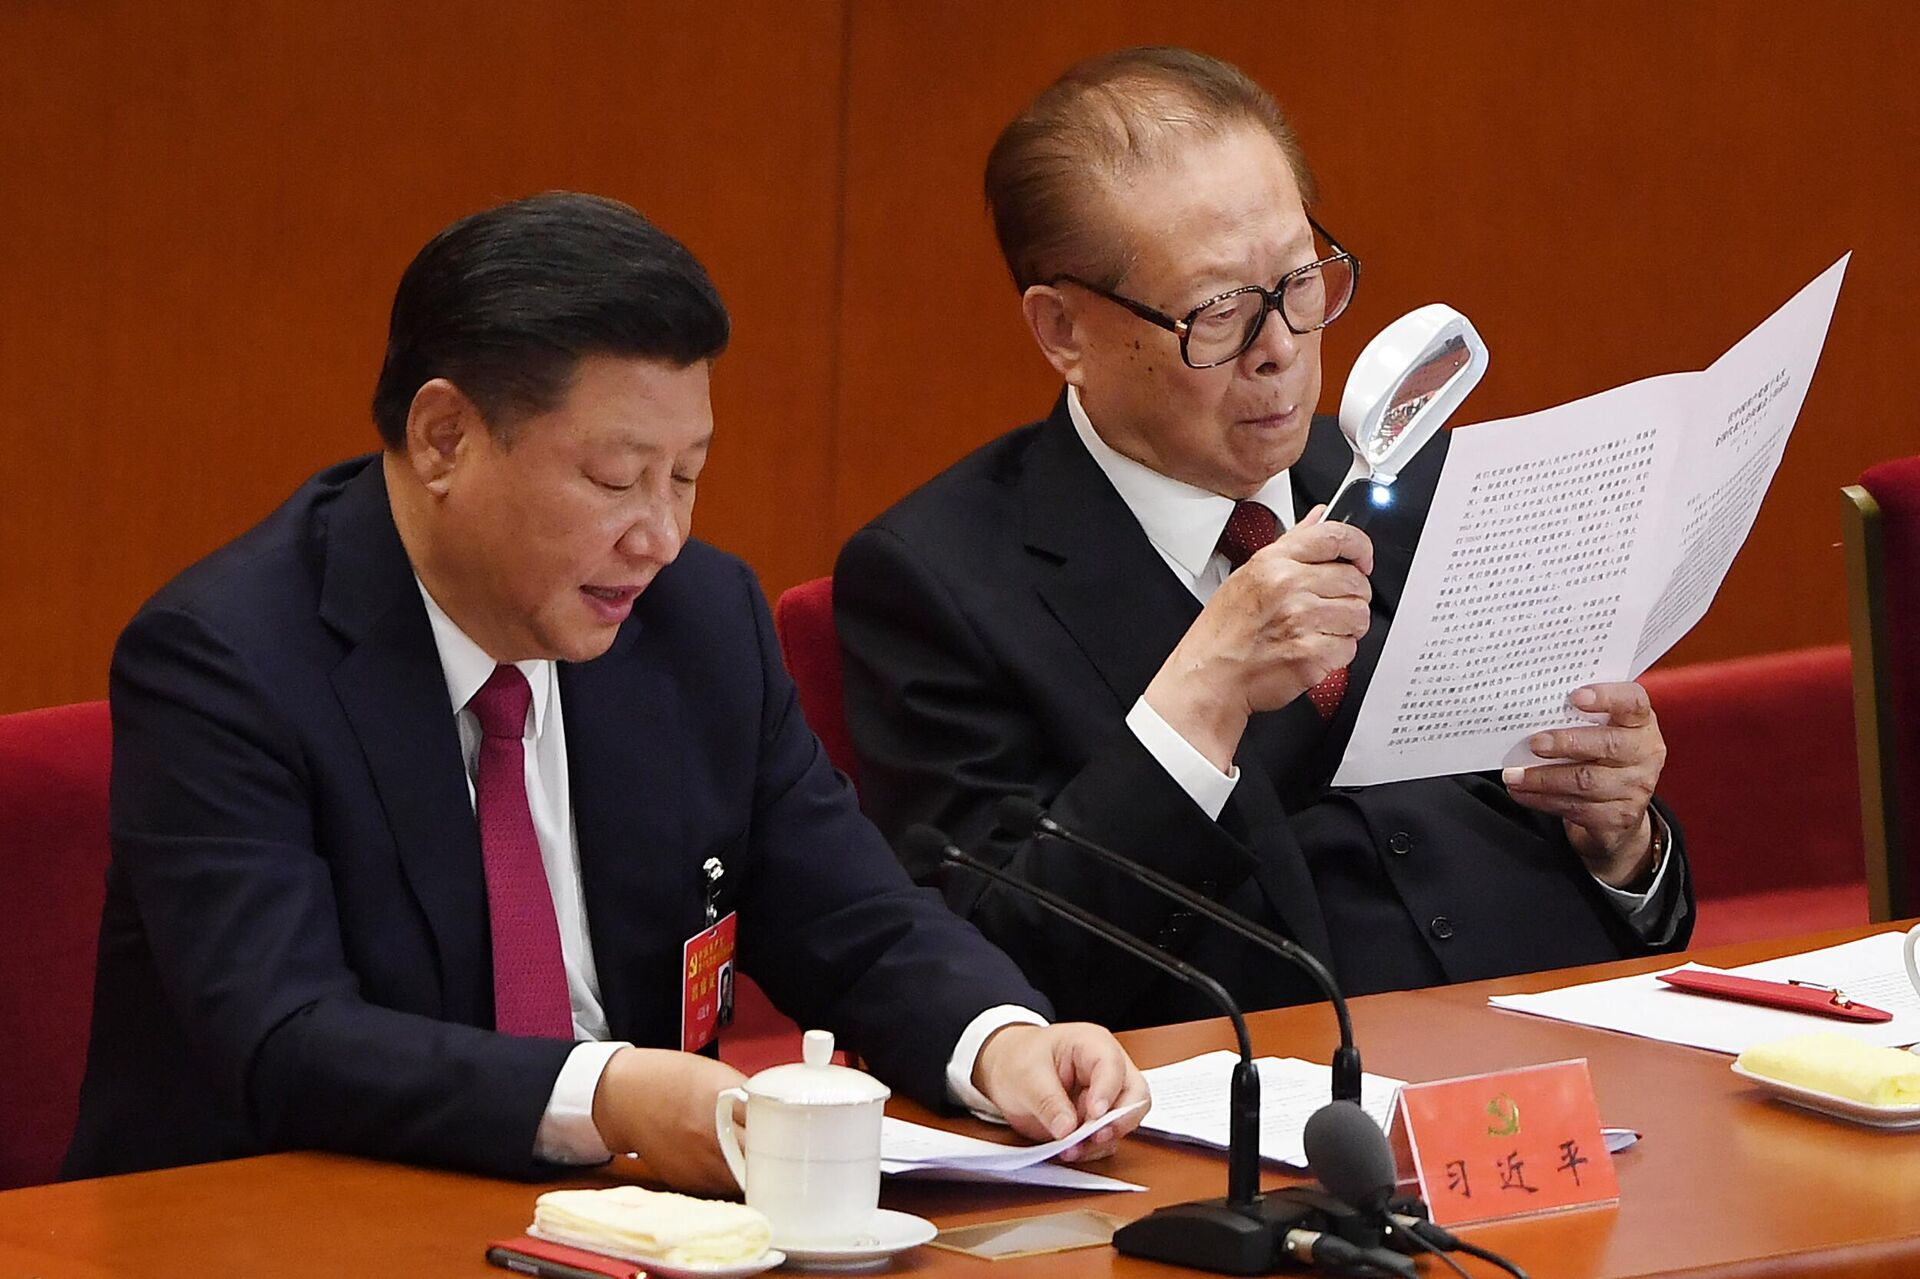 Chinese President Xi Jinping speaks as former president Jiang Zemin reads a document during the closing session of the 19th Communist Party Congress at the Great Hall of the People in Beijing on October 24, 2017. - Sputnik International, 1920, 30.11.2022